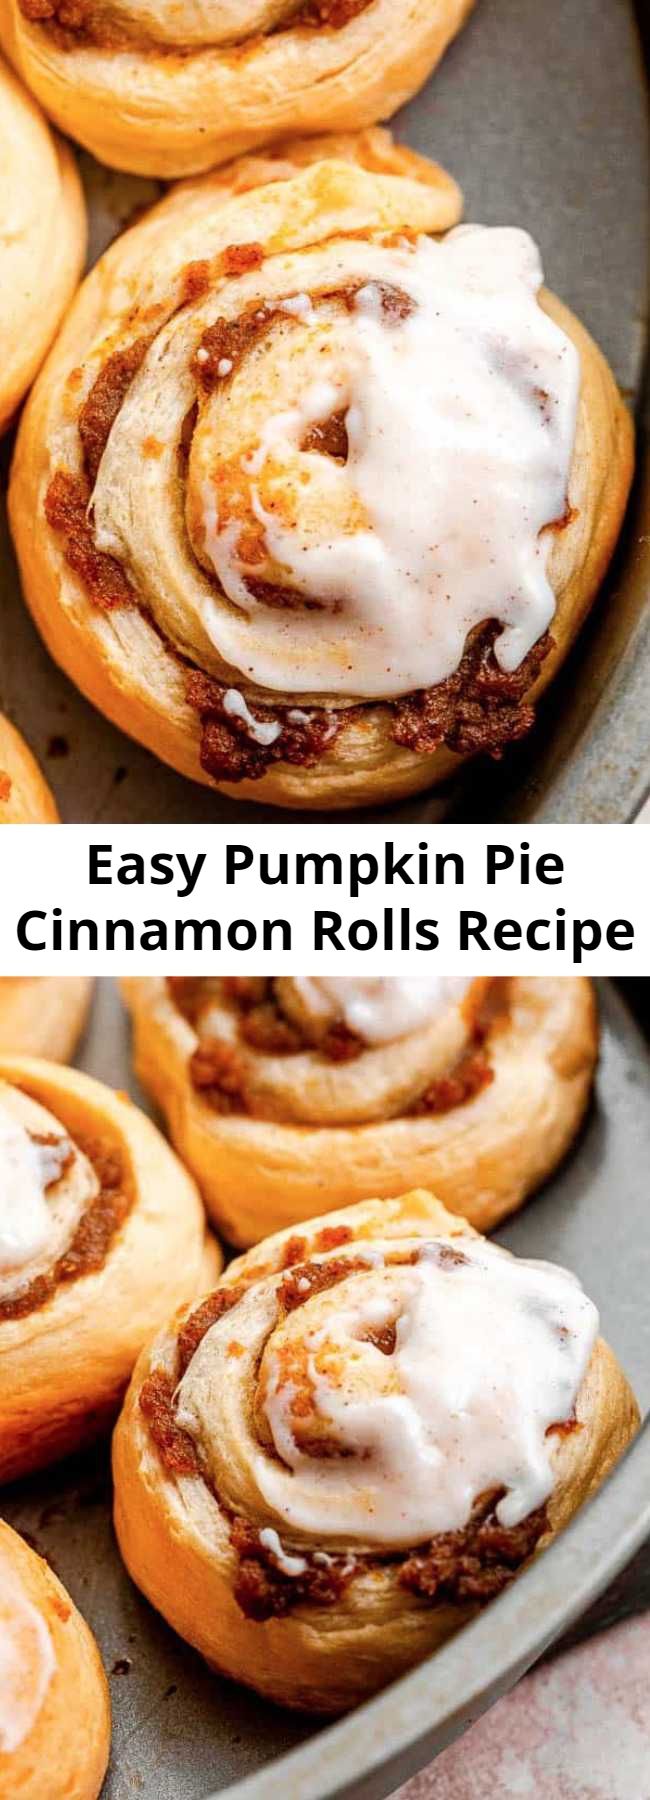 Easy Pumpkin Pie Cinnamon Rolls Recipe - These Pumpkin Pie Cinnamon Rolls are prepared with a tasty pumpkin filling and an incredible pumpkin pie spice cream cheese frosting! They’re easy to make in just 30 minutes with refrigerated crescent dough.